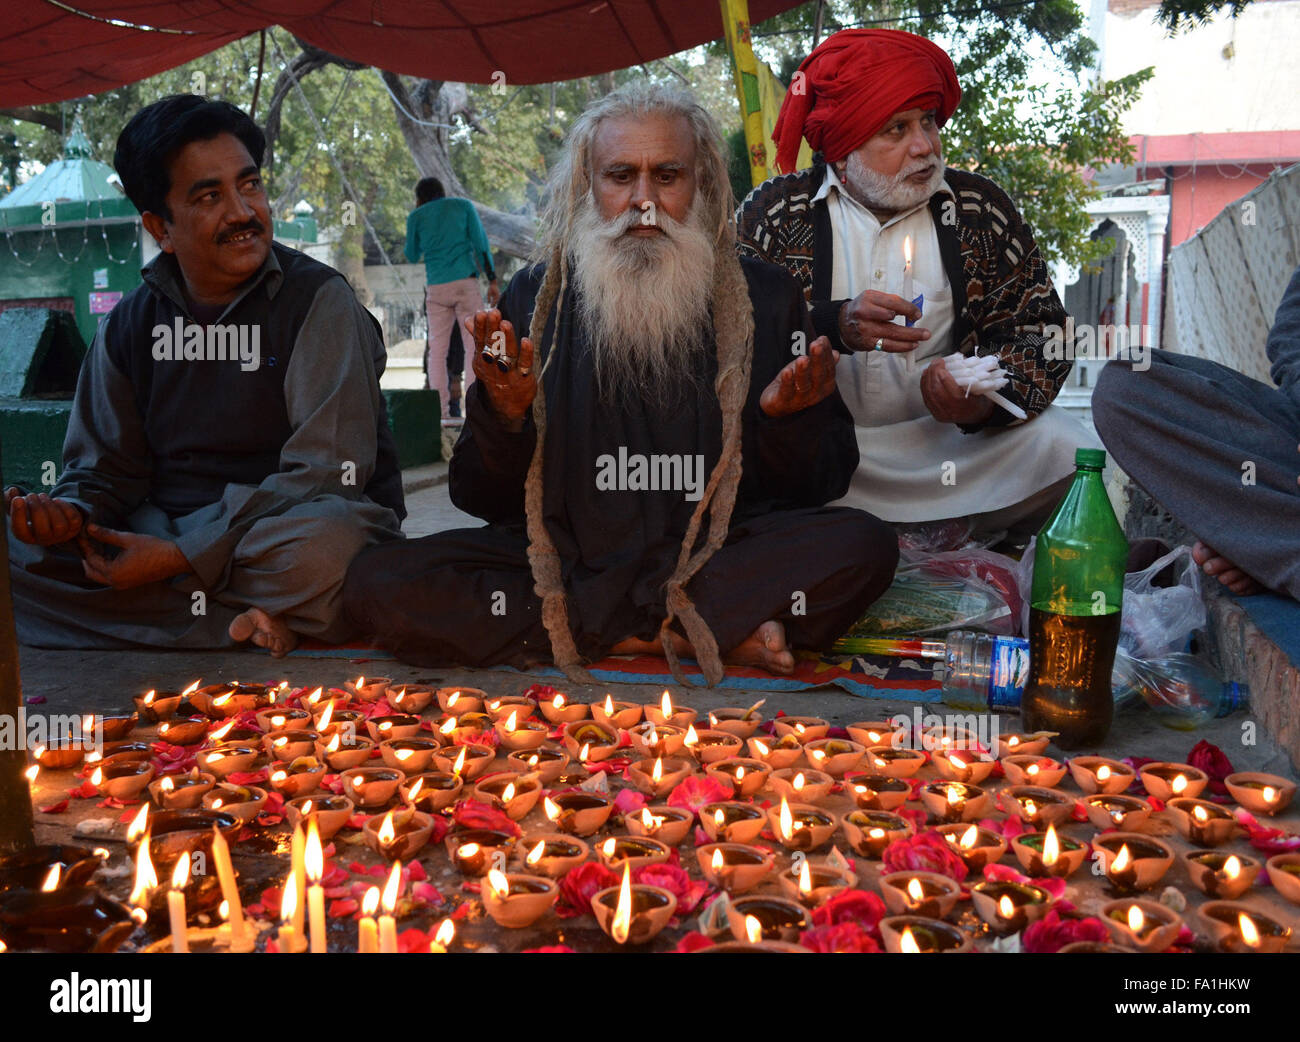 Lahore. 19th Dec, 2015. Pakistani Muslim devotees pray at the shrine of the Sufi saint Mian Mir Sahib during a festival to mark the saint's death anniversary in eastern Pakistan's Lahore, Dec. 19, 2015. Hundreds of devotees are attending the two-day festival. © Jamil Ahmed/Xinhua/Alamy Live News Stock Photo